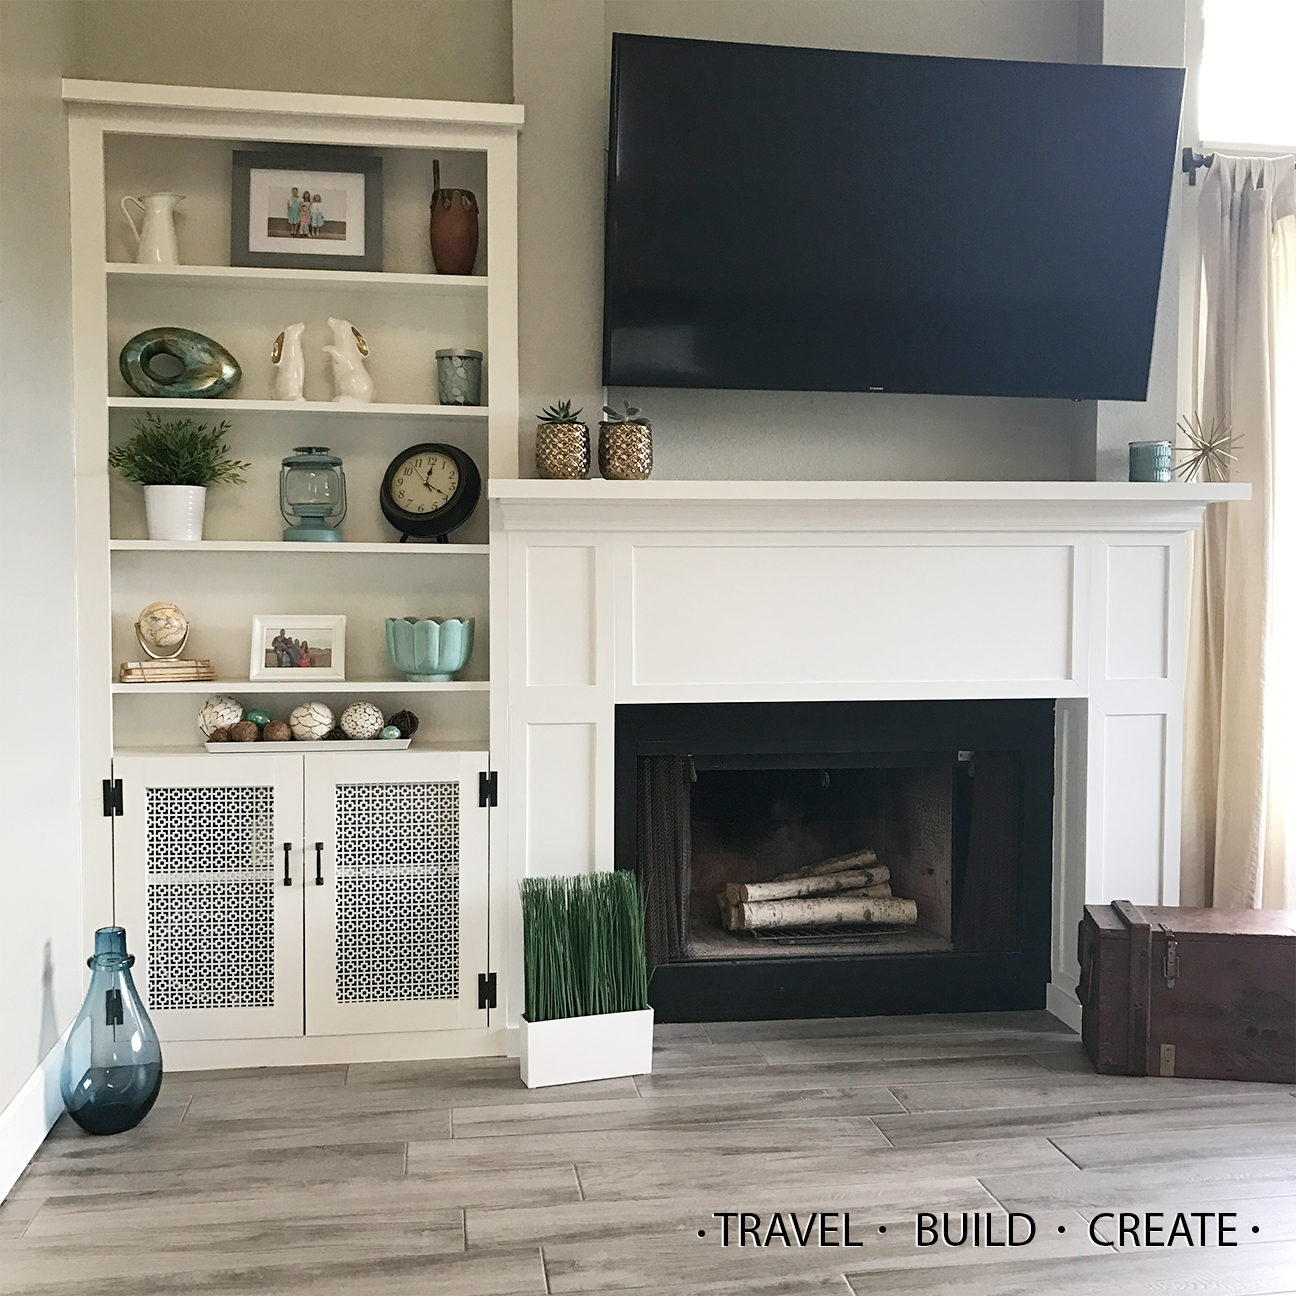 Diy Fireplace Surround And Built In, Built In Bookcase Ideas Around Fireplace